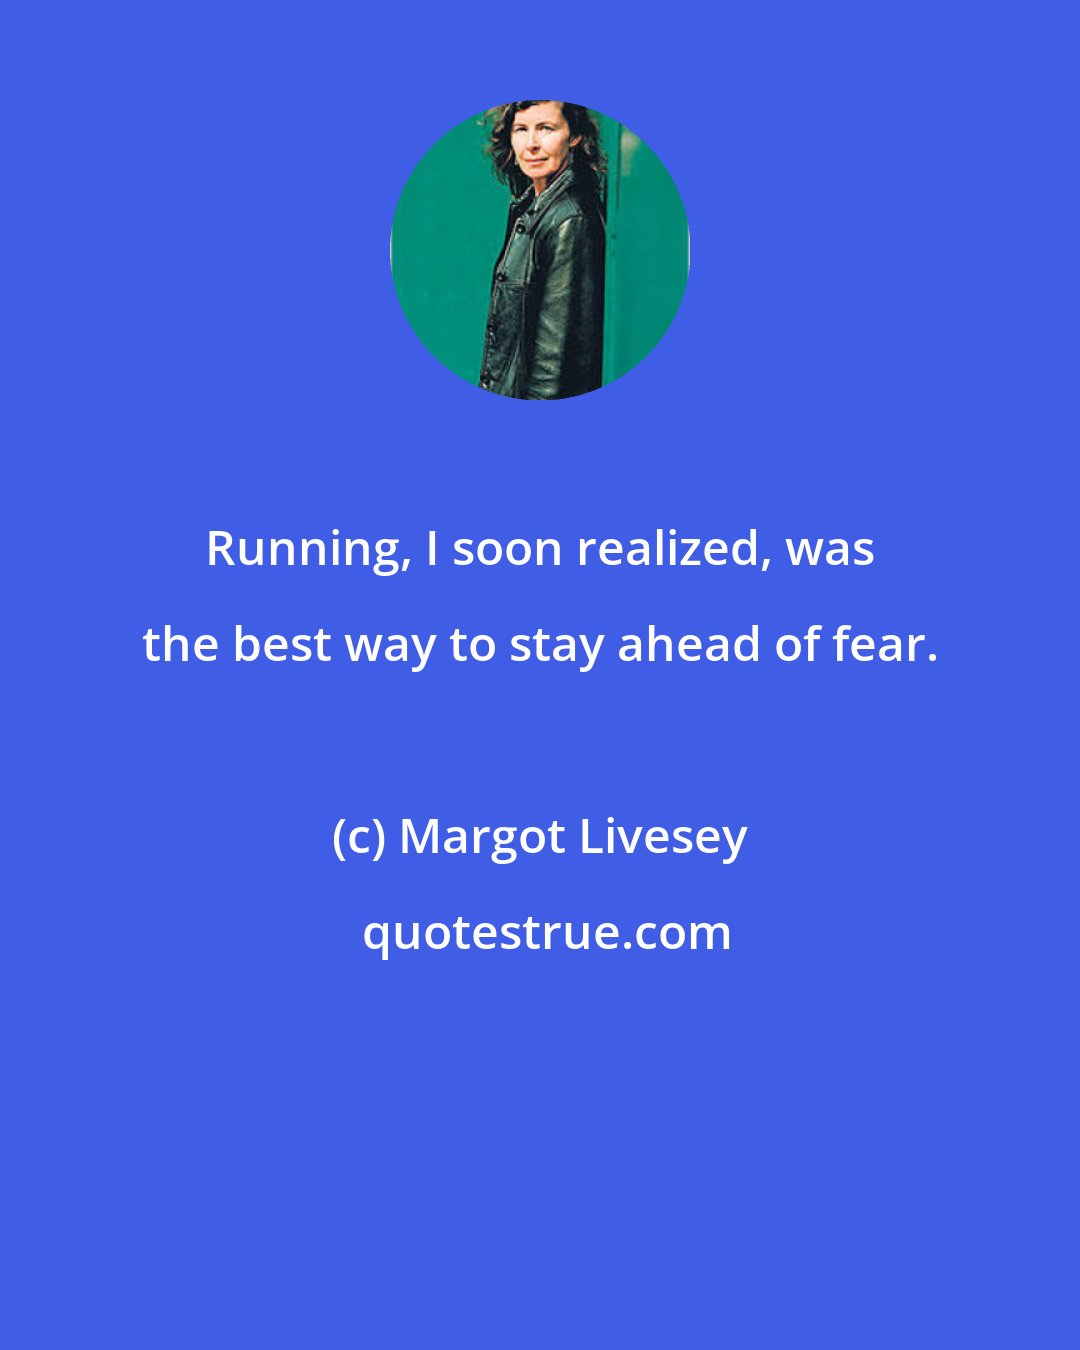 Margot Livesey: Running, I soon realized, was the best way to stay ahead of fear.